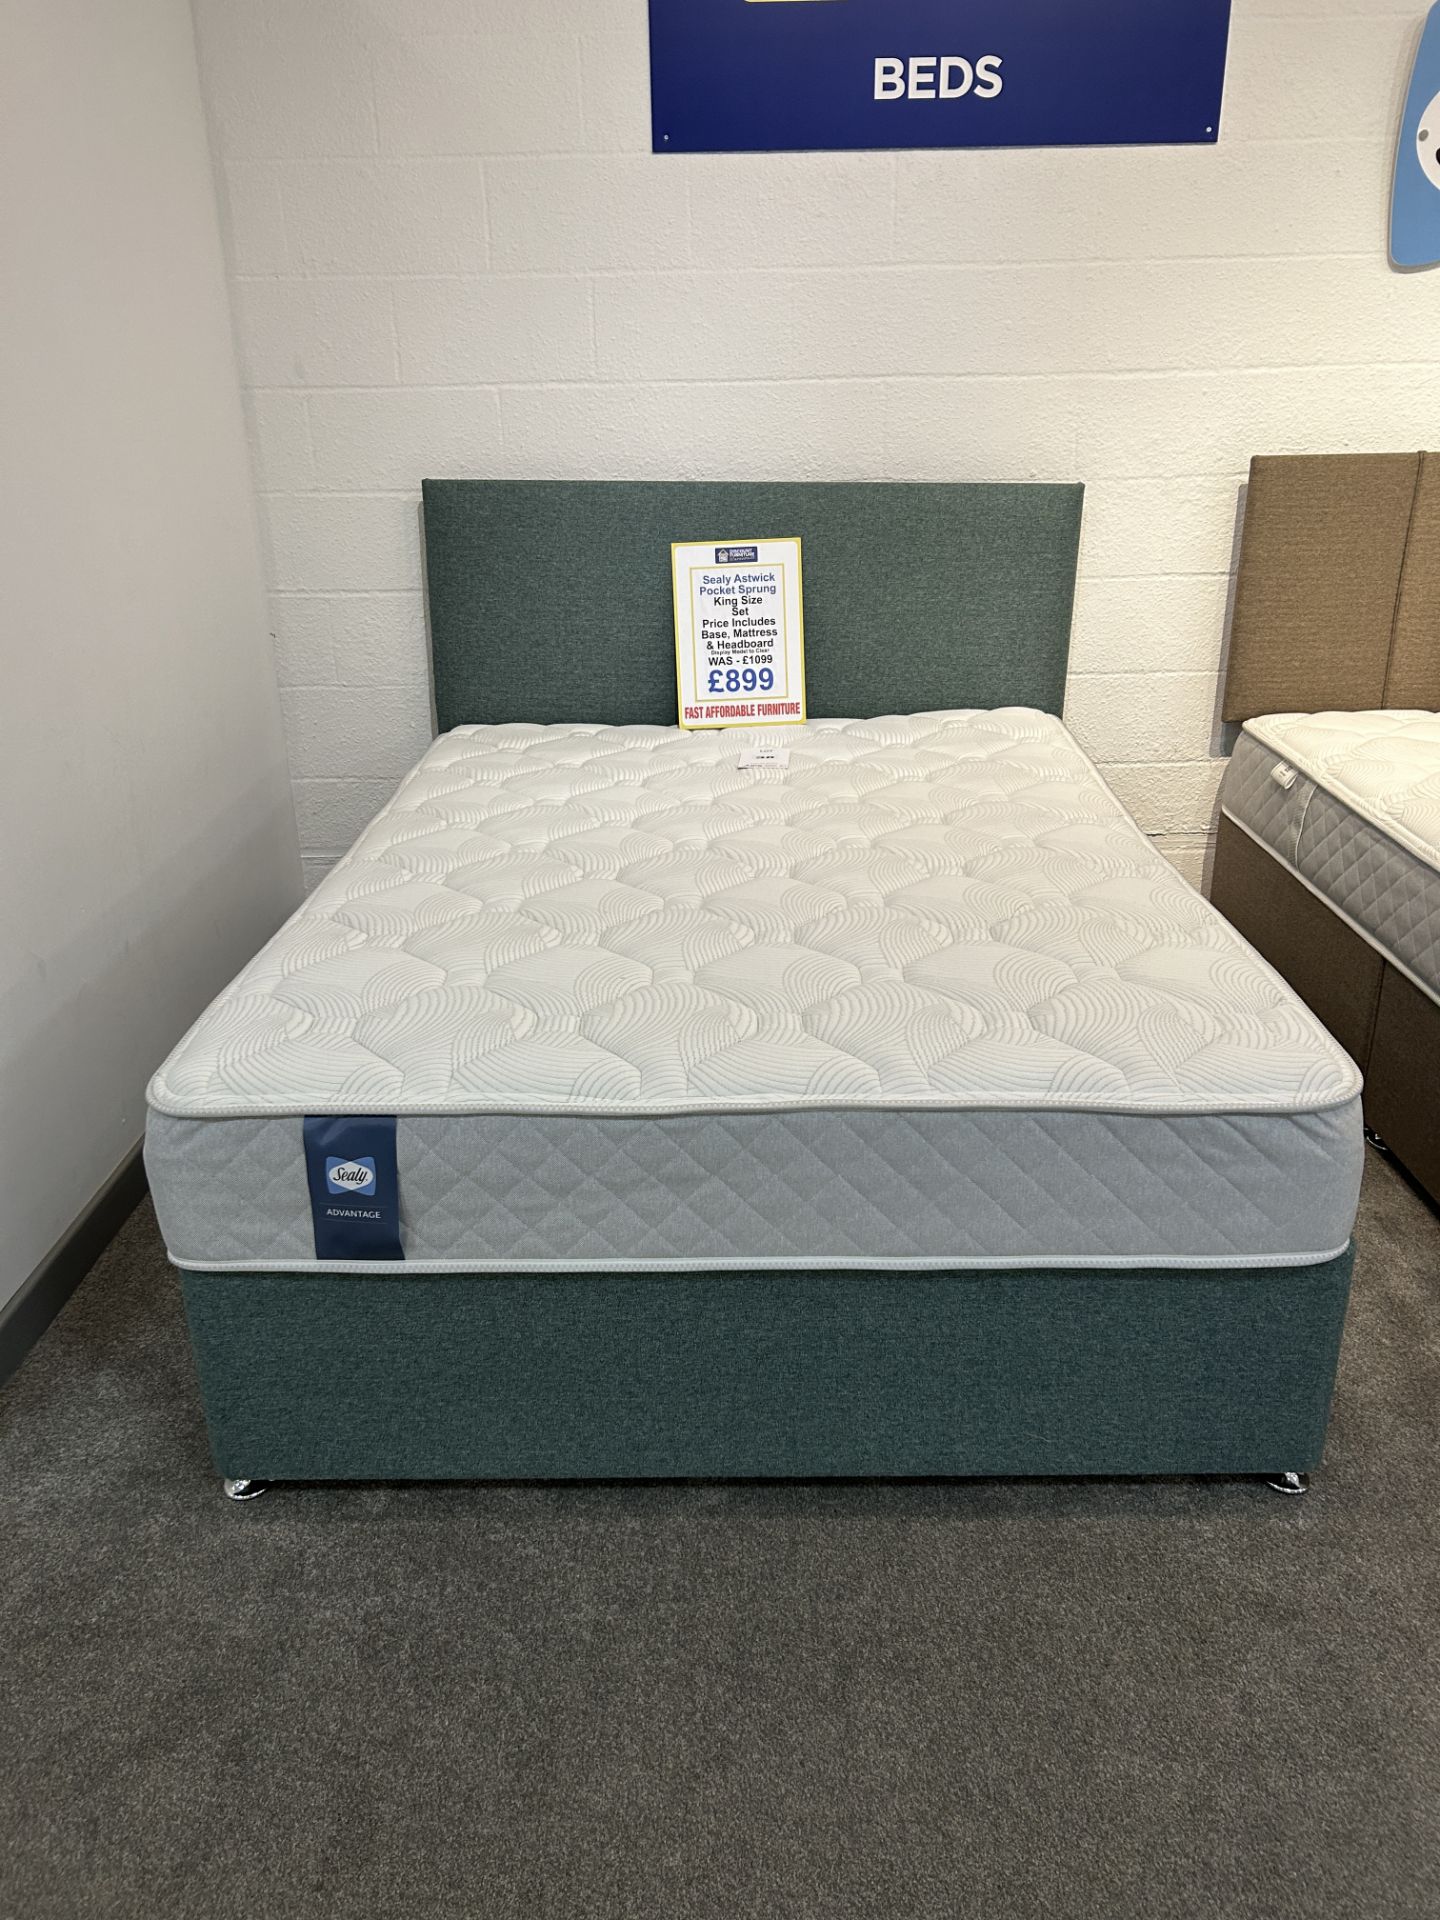 Ex-Display King Size Bed Set incl: Sealy Astwick Mattress, Base & Headboard | RRP £1,099